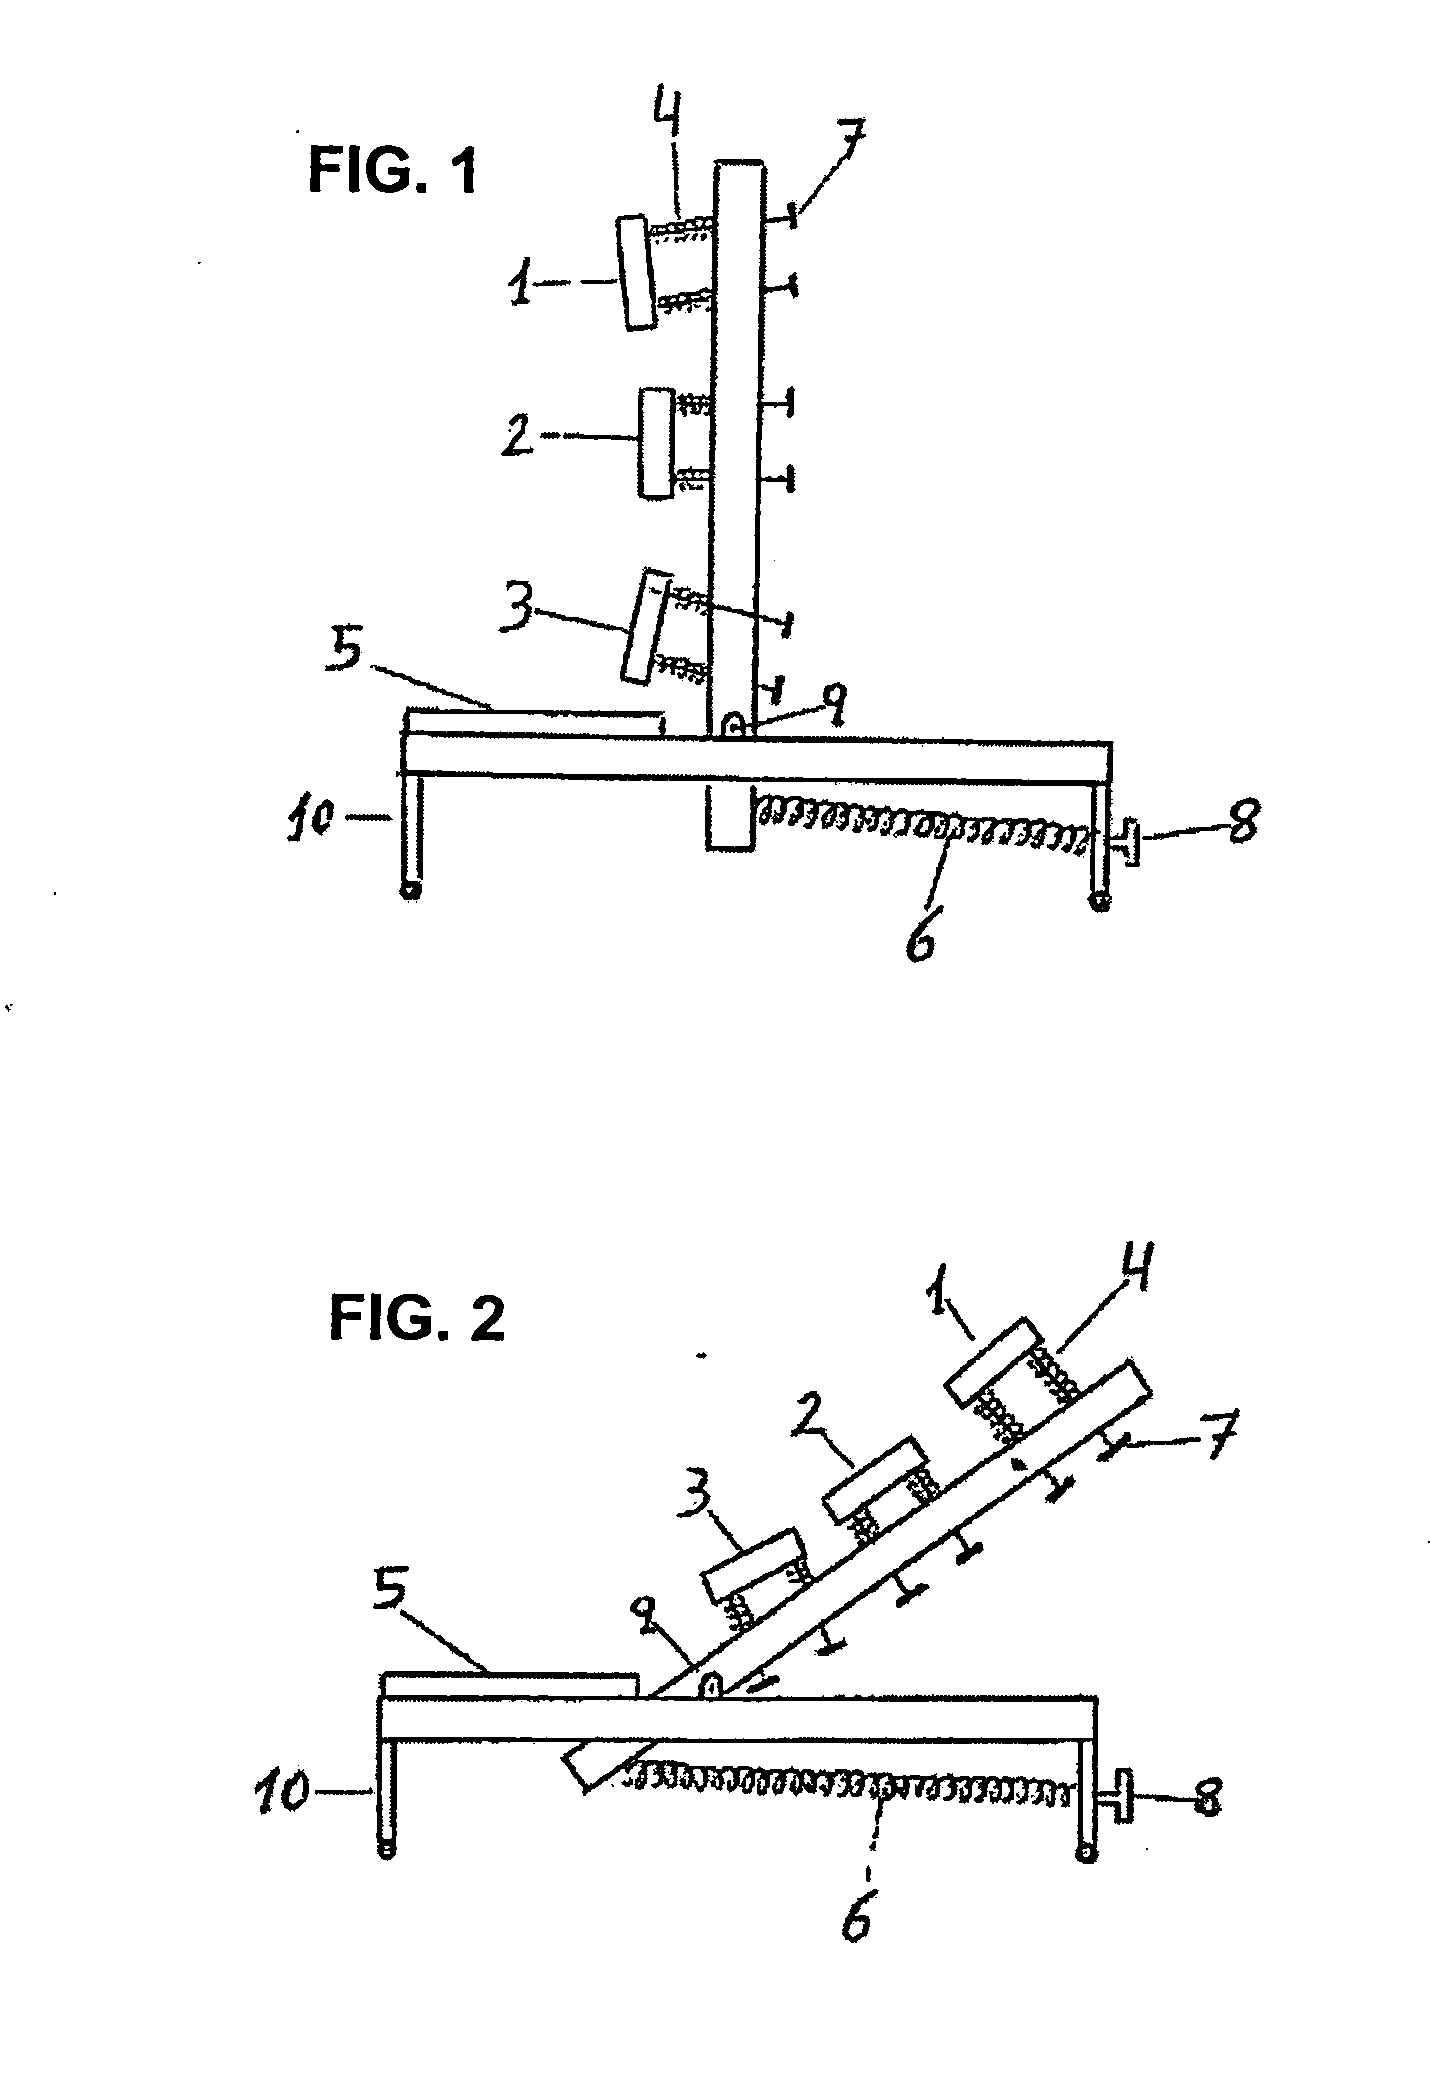 Apparatus for the Prevention and Treatment of Back Pain